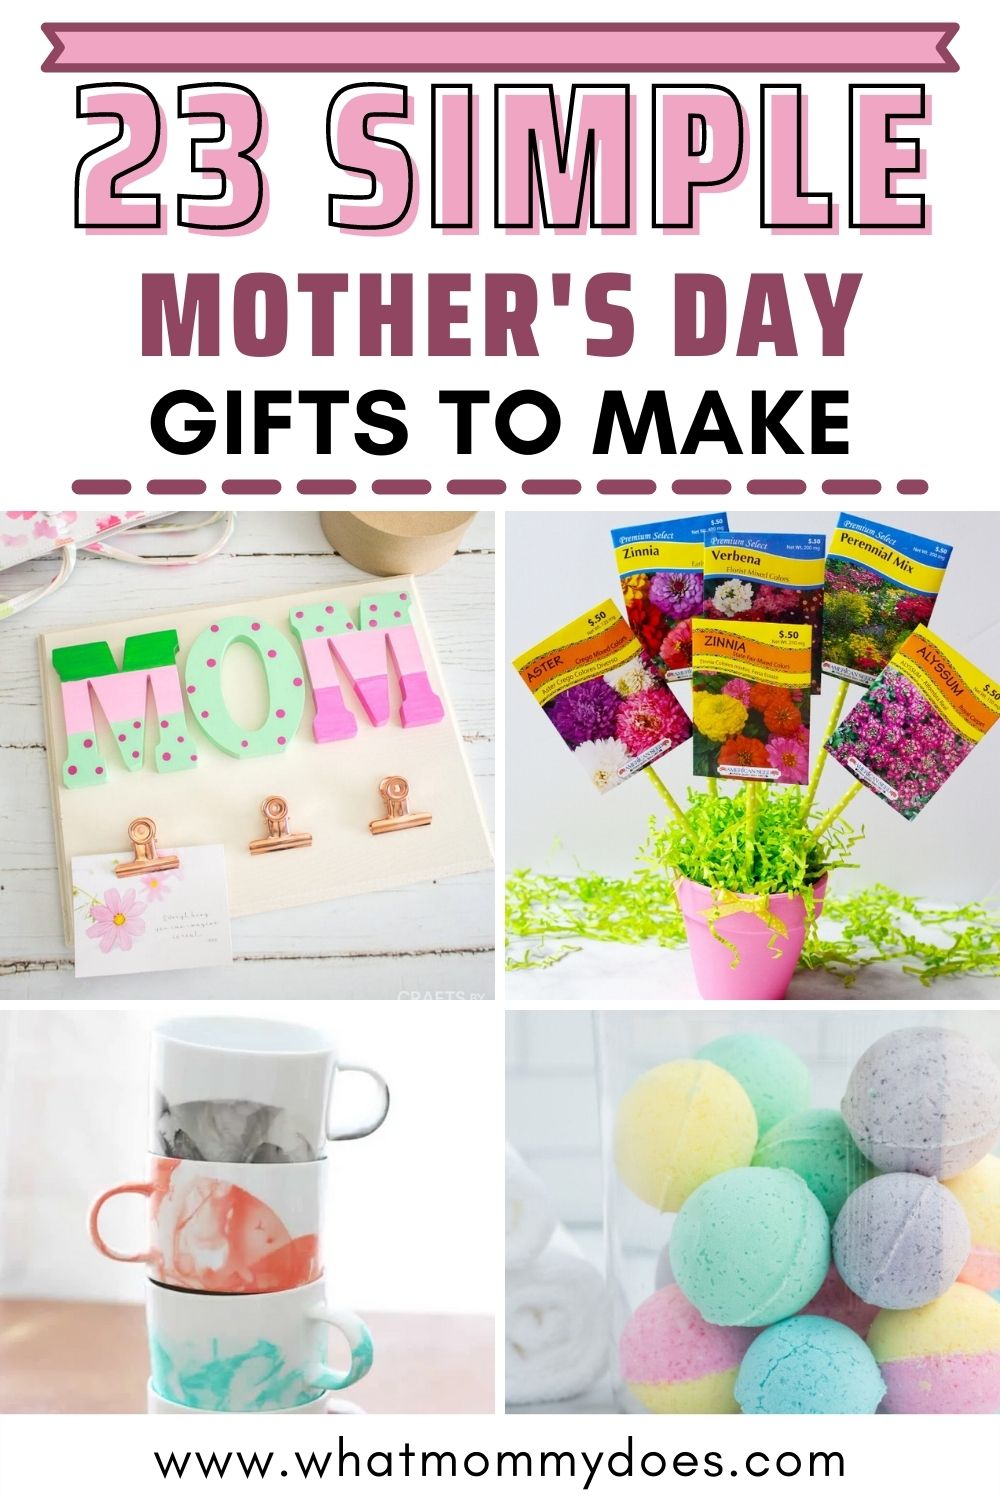 23 Simple Mother's Day Gifts to Make - What Mommy Does